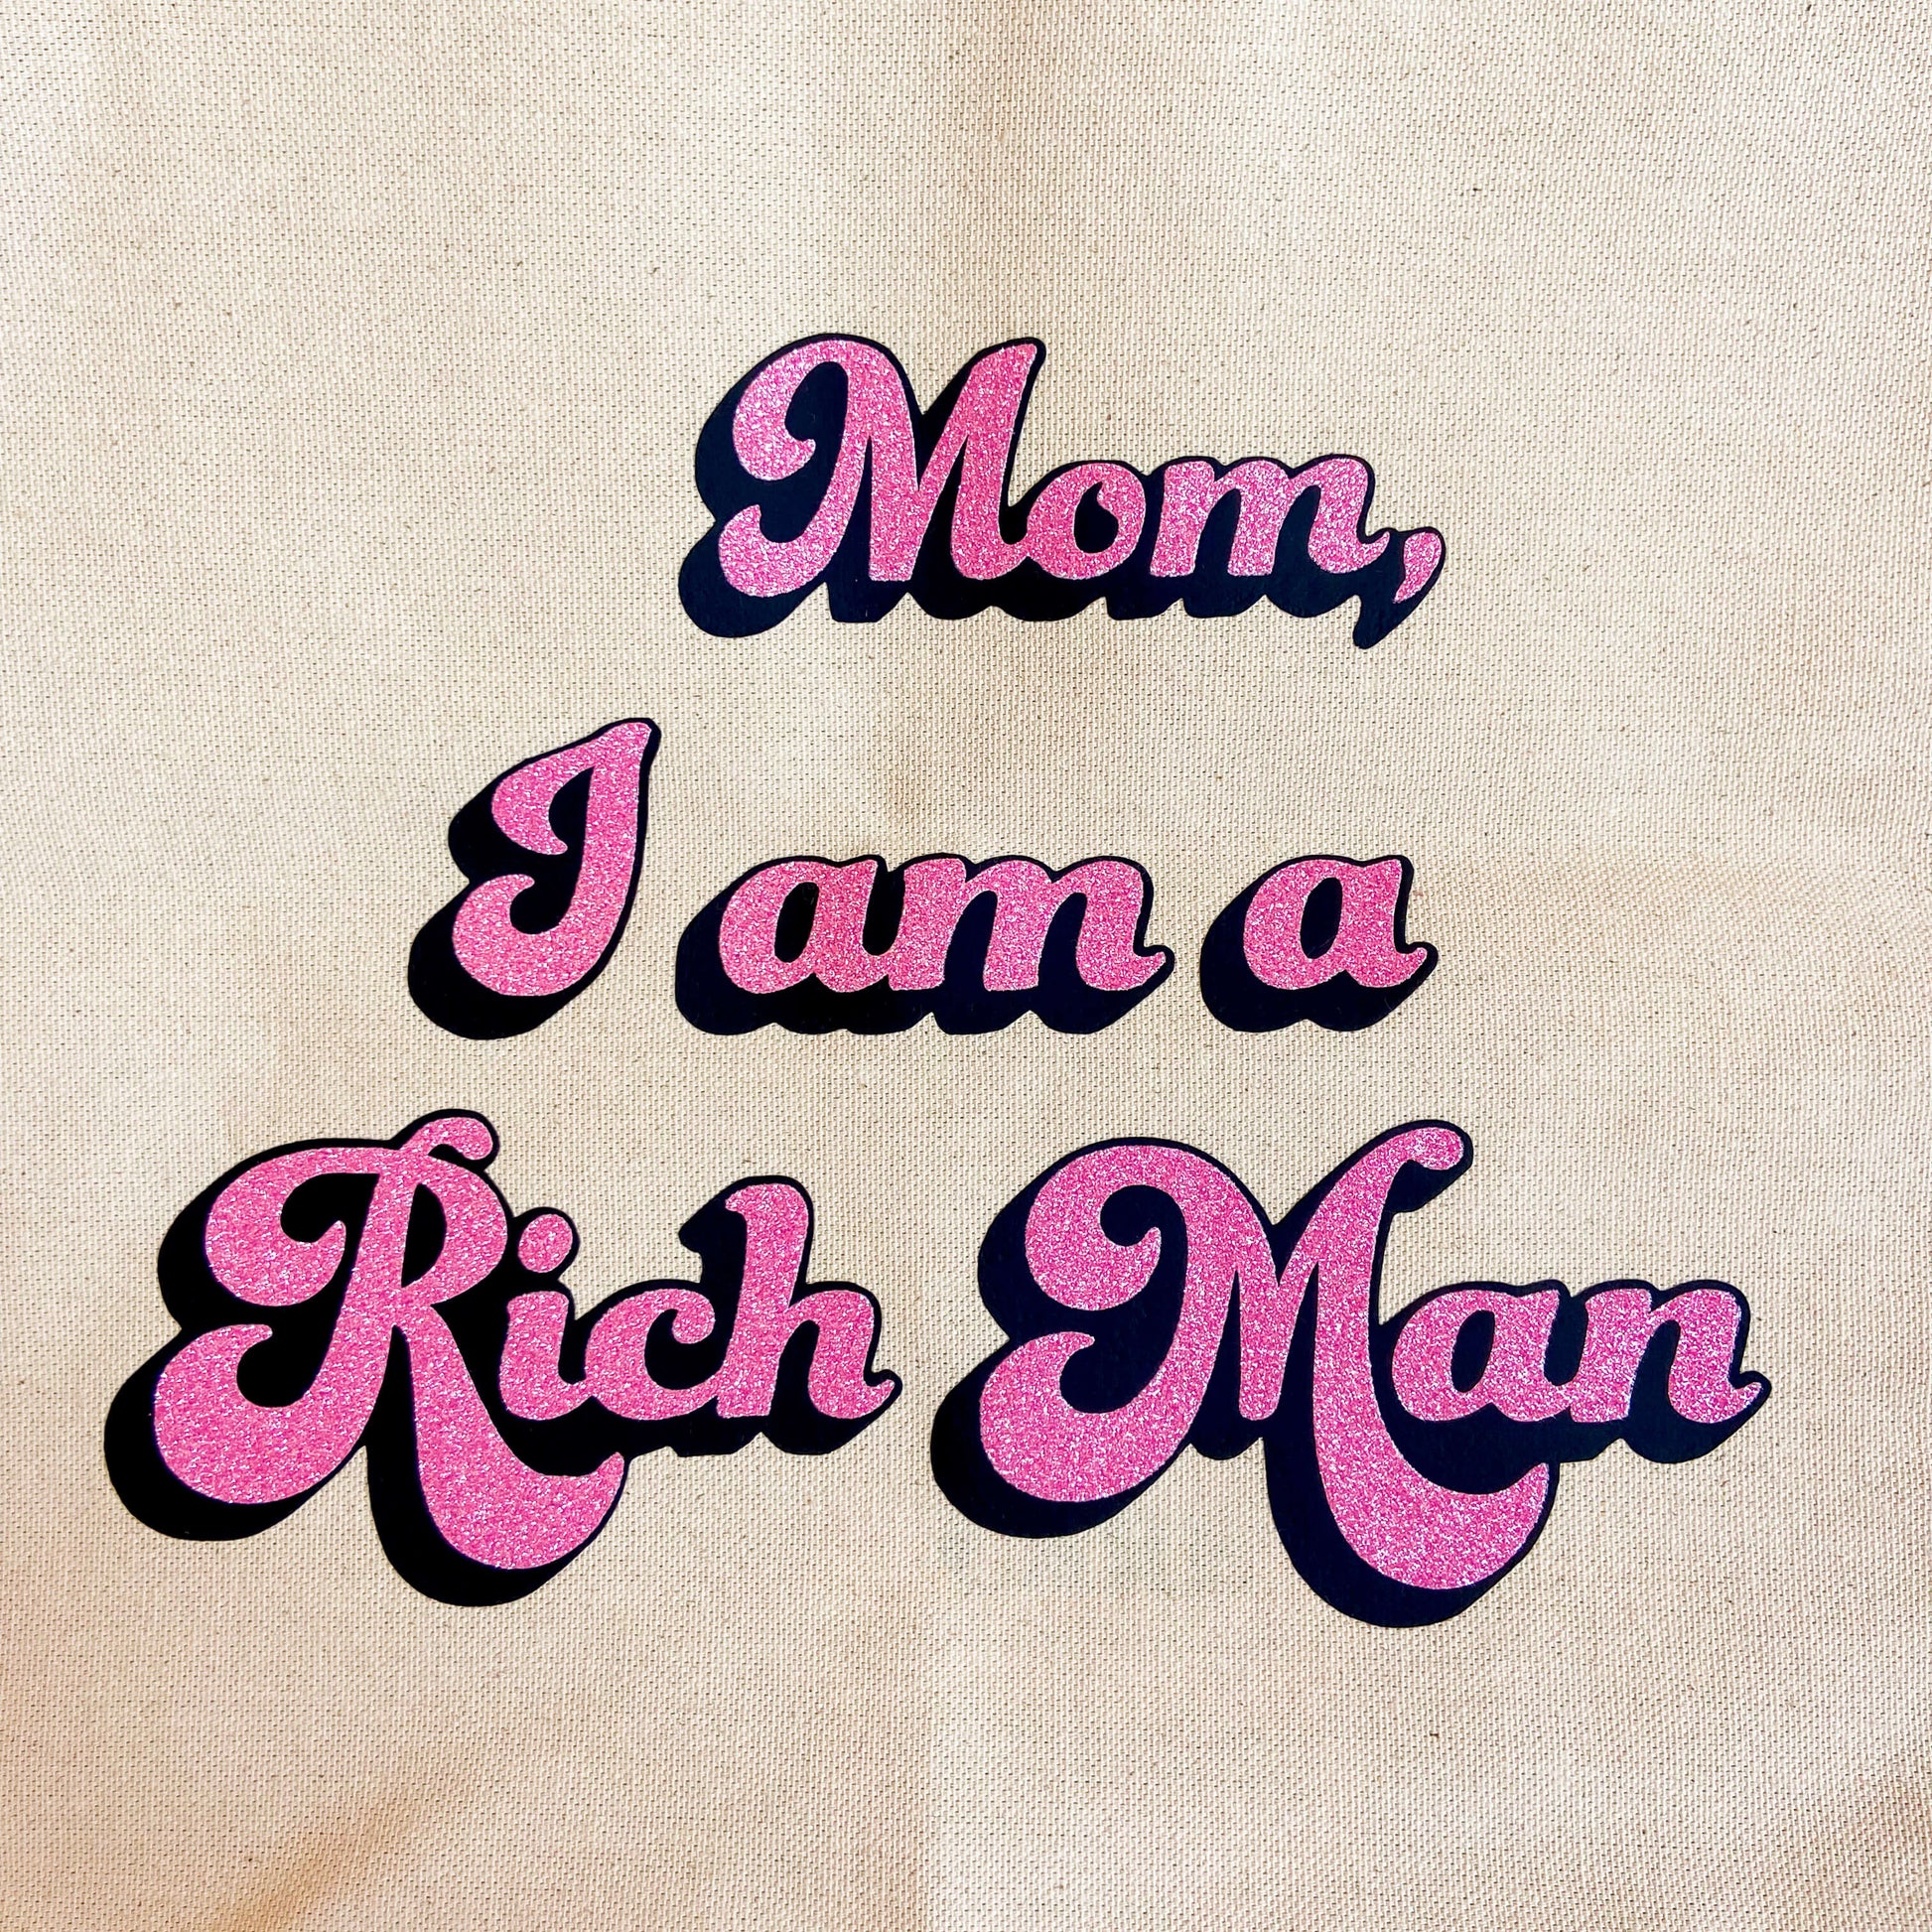 Burlap tote bag with pink glitter text reading "mom i am a rich man"